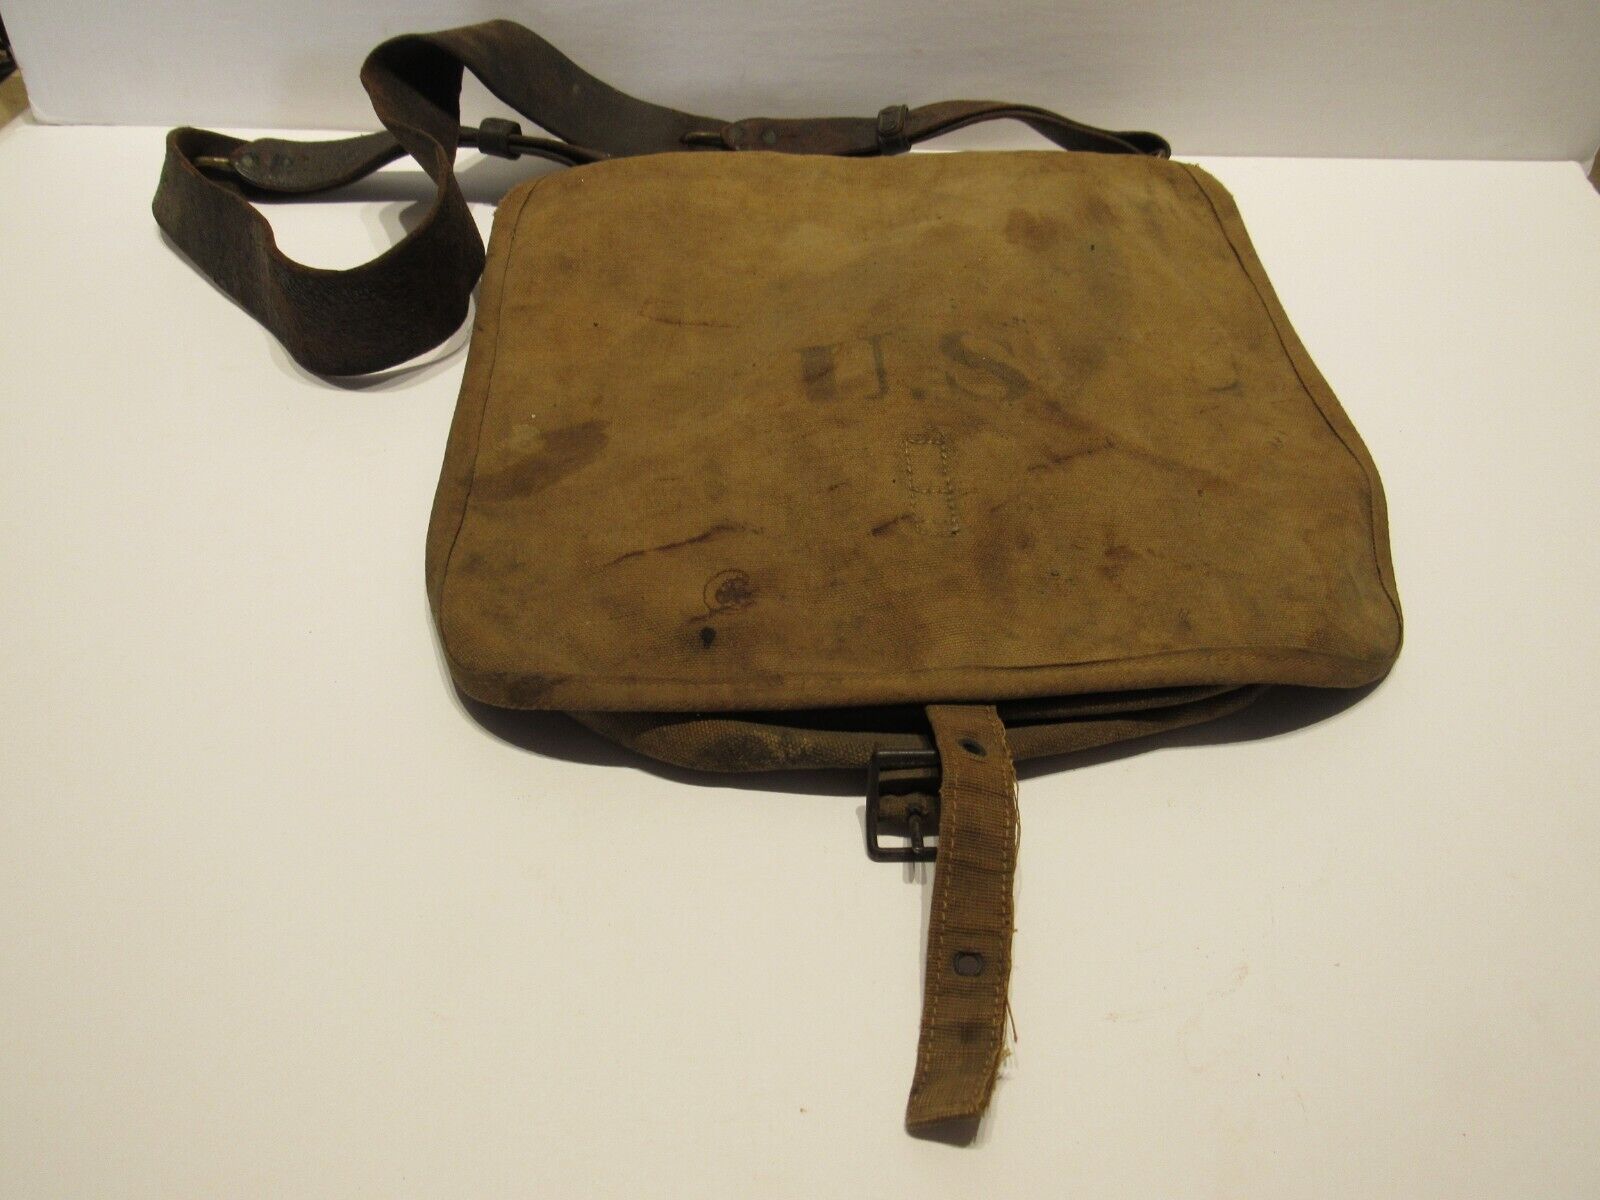 U.S INDIAN WARS/US Army /1878  CANVAS HAVERSACK W/STRAP.  I.D./NAMED